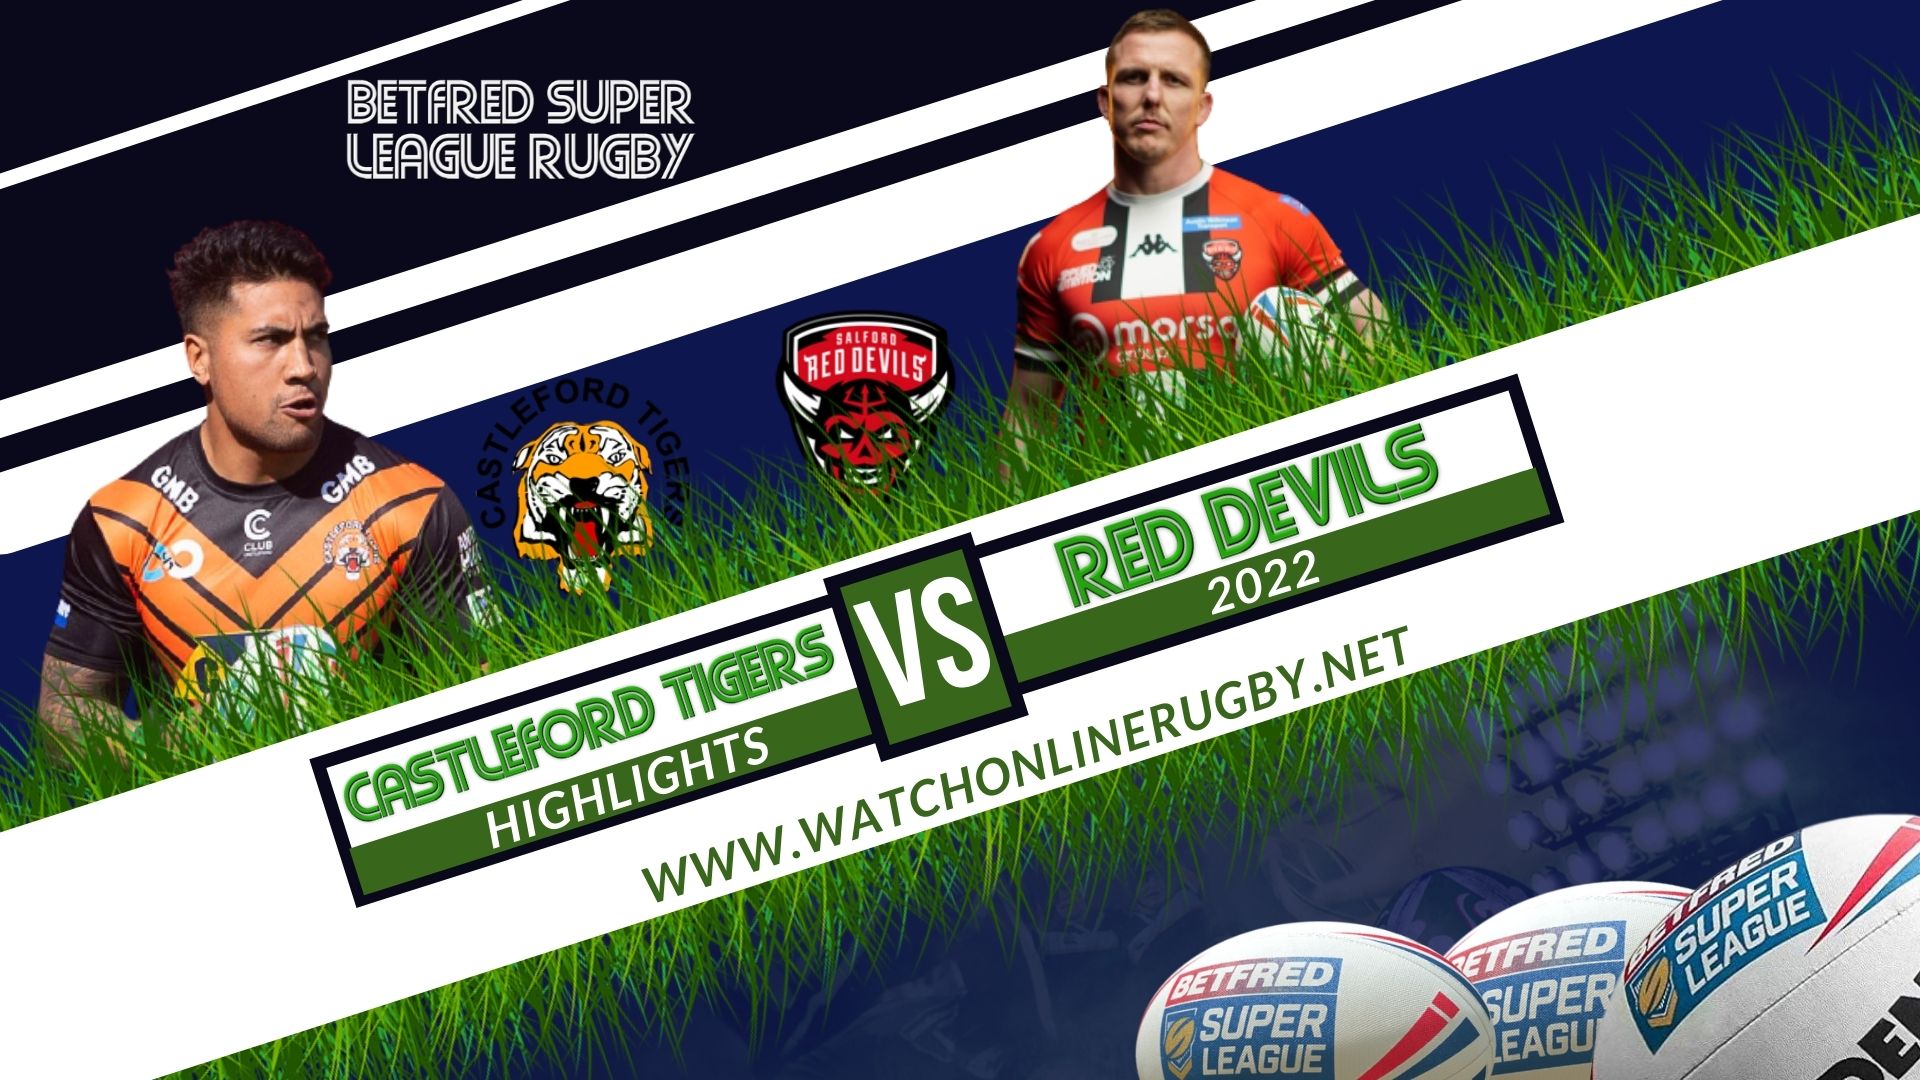 Castleford Tigers Vs Salford Red Devils Super League Rugby 2022 RD 1